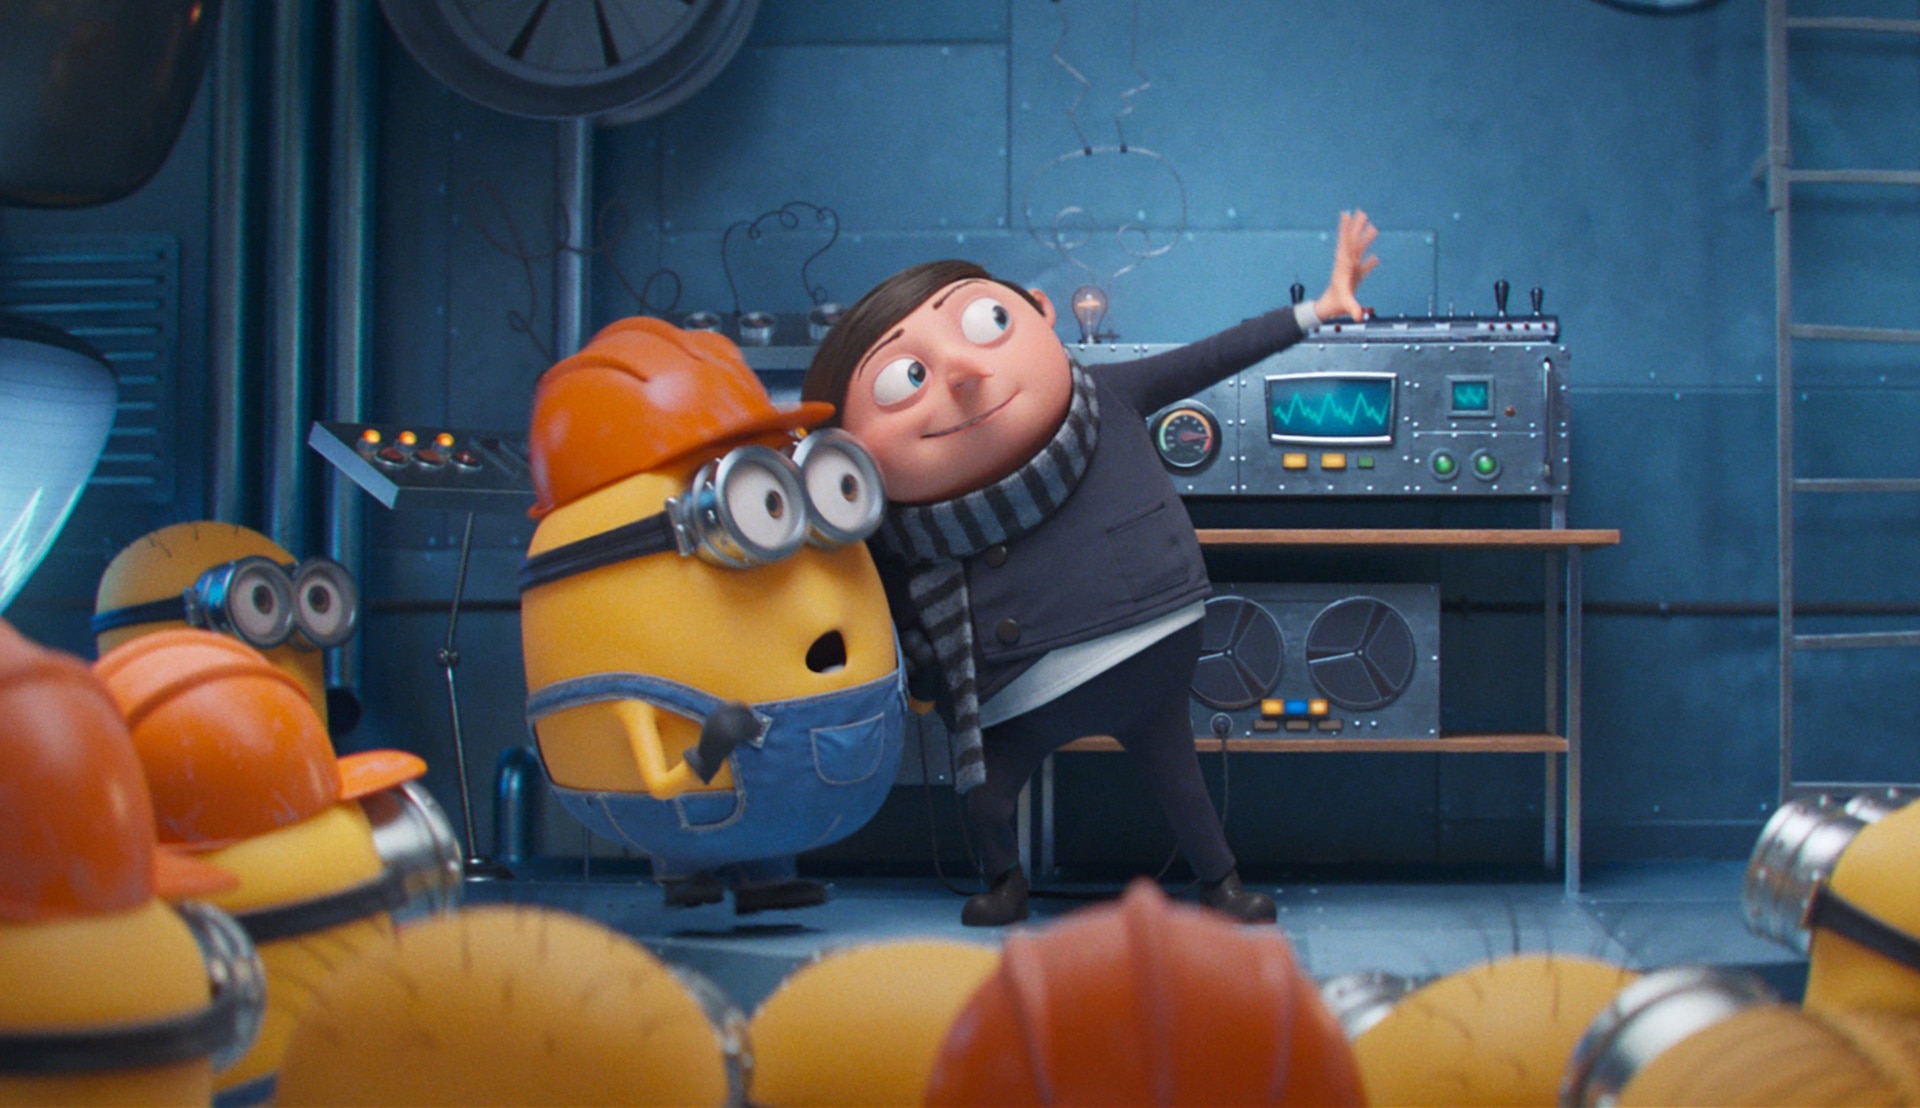 Minions: The Rise of Gru streaming on Peacock | SYFY WIRE